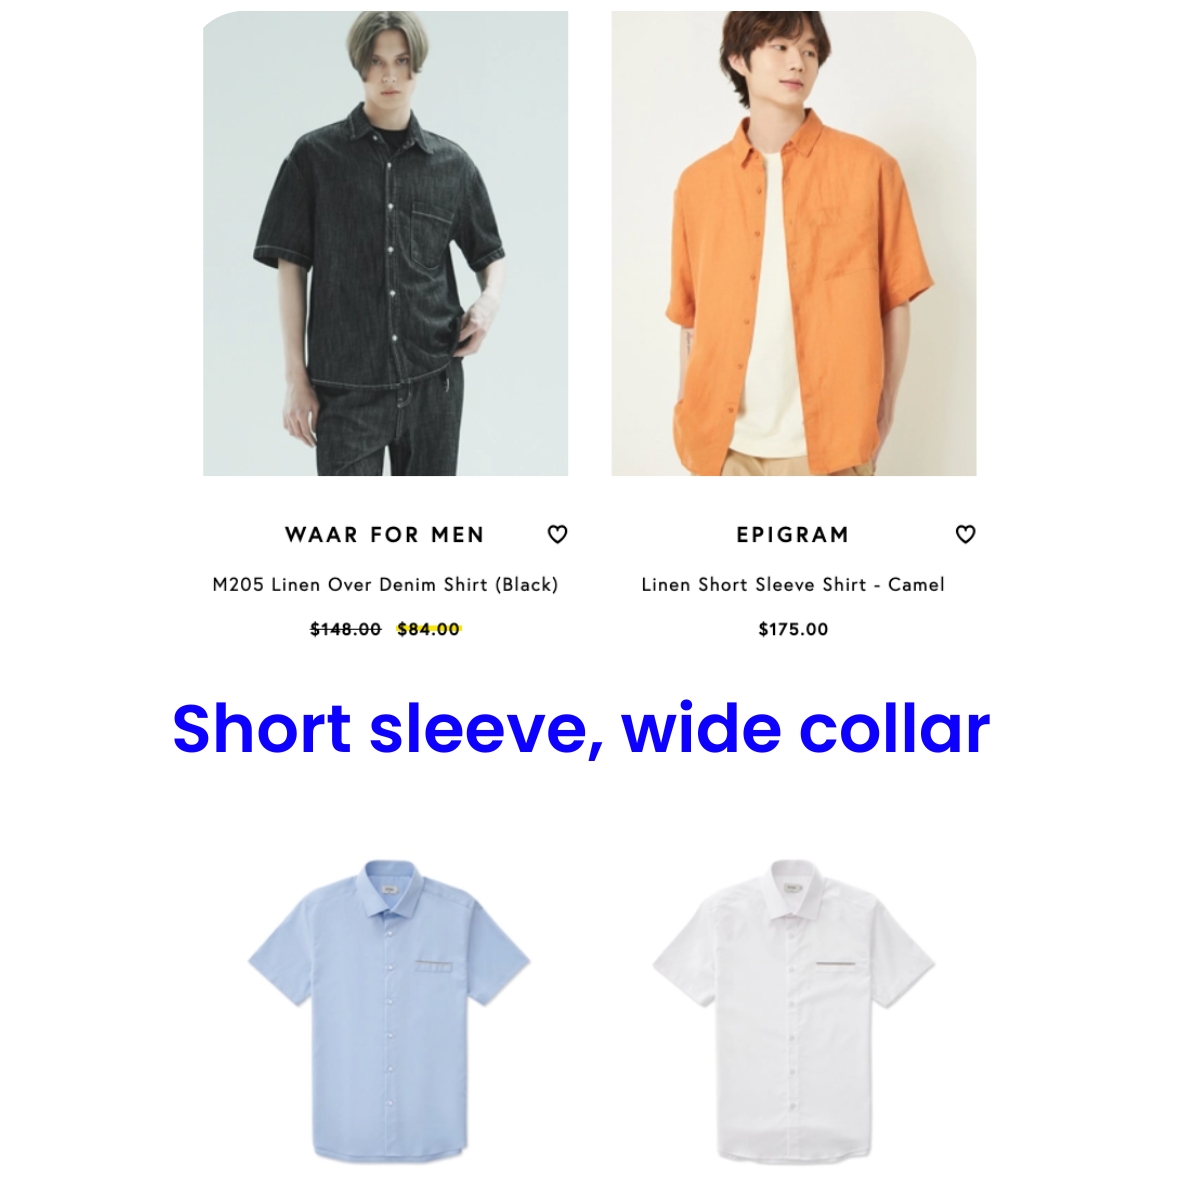 Short sleeve, wide collar shirts with AI product filtering